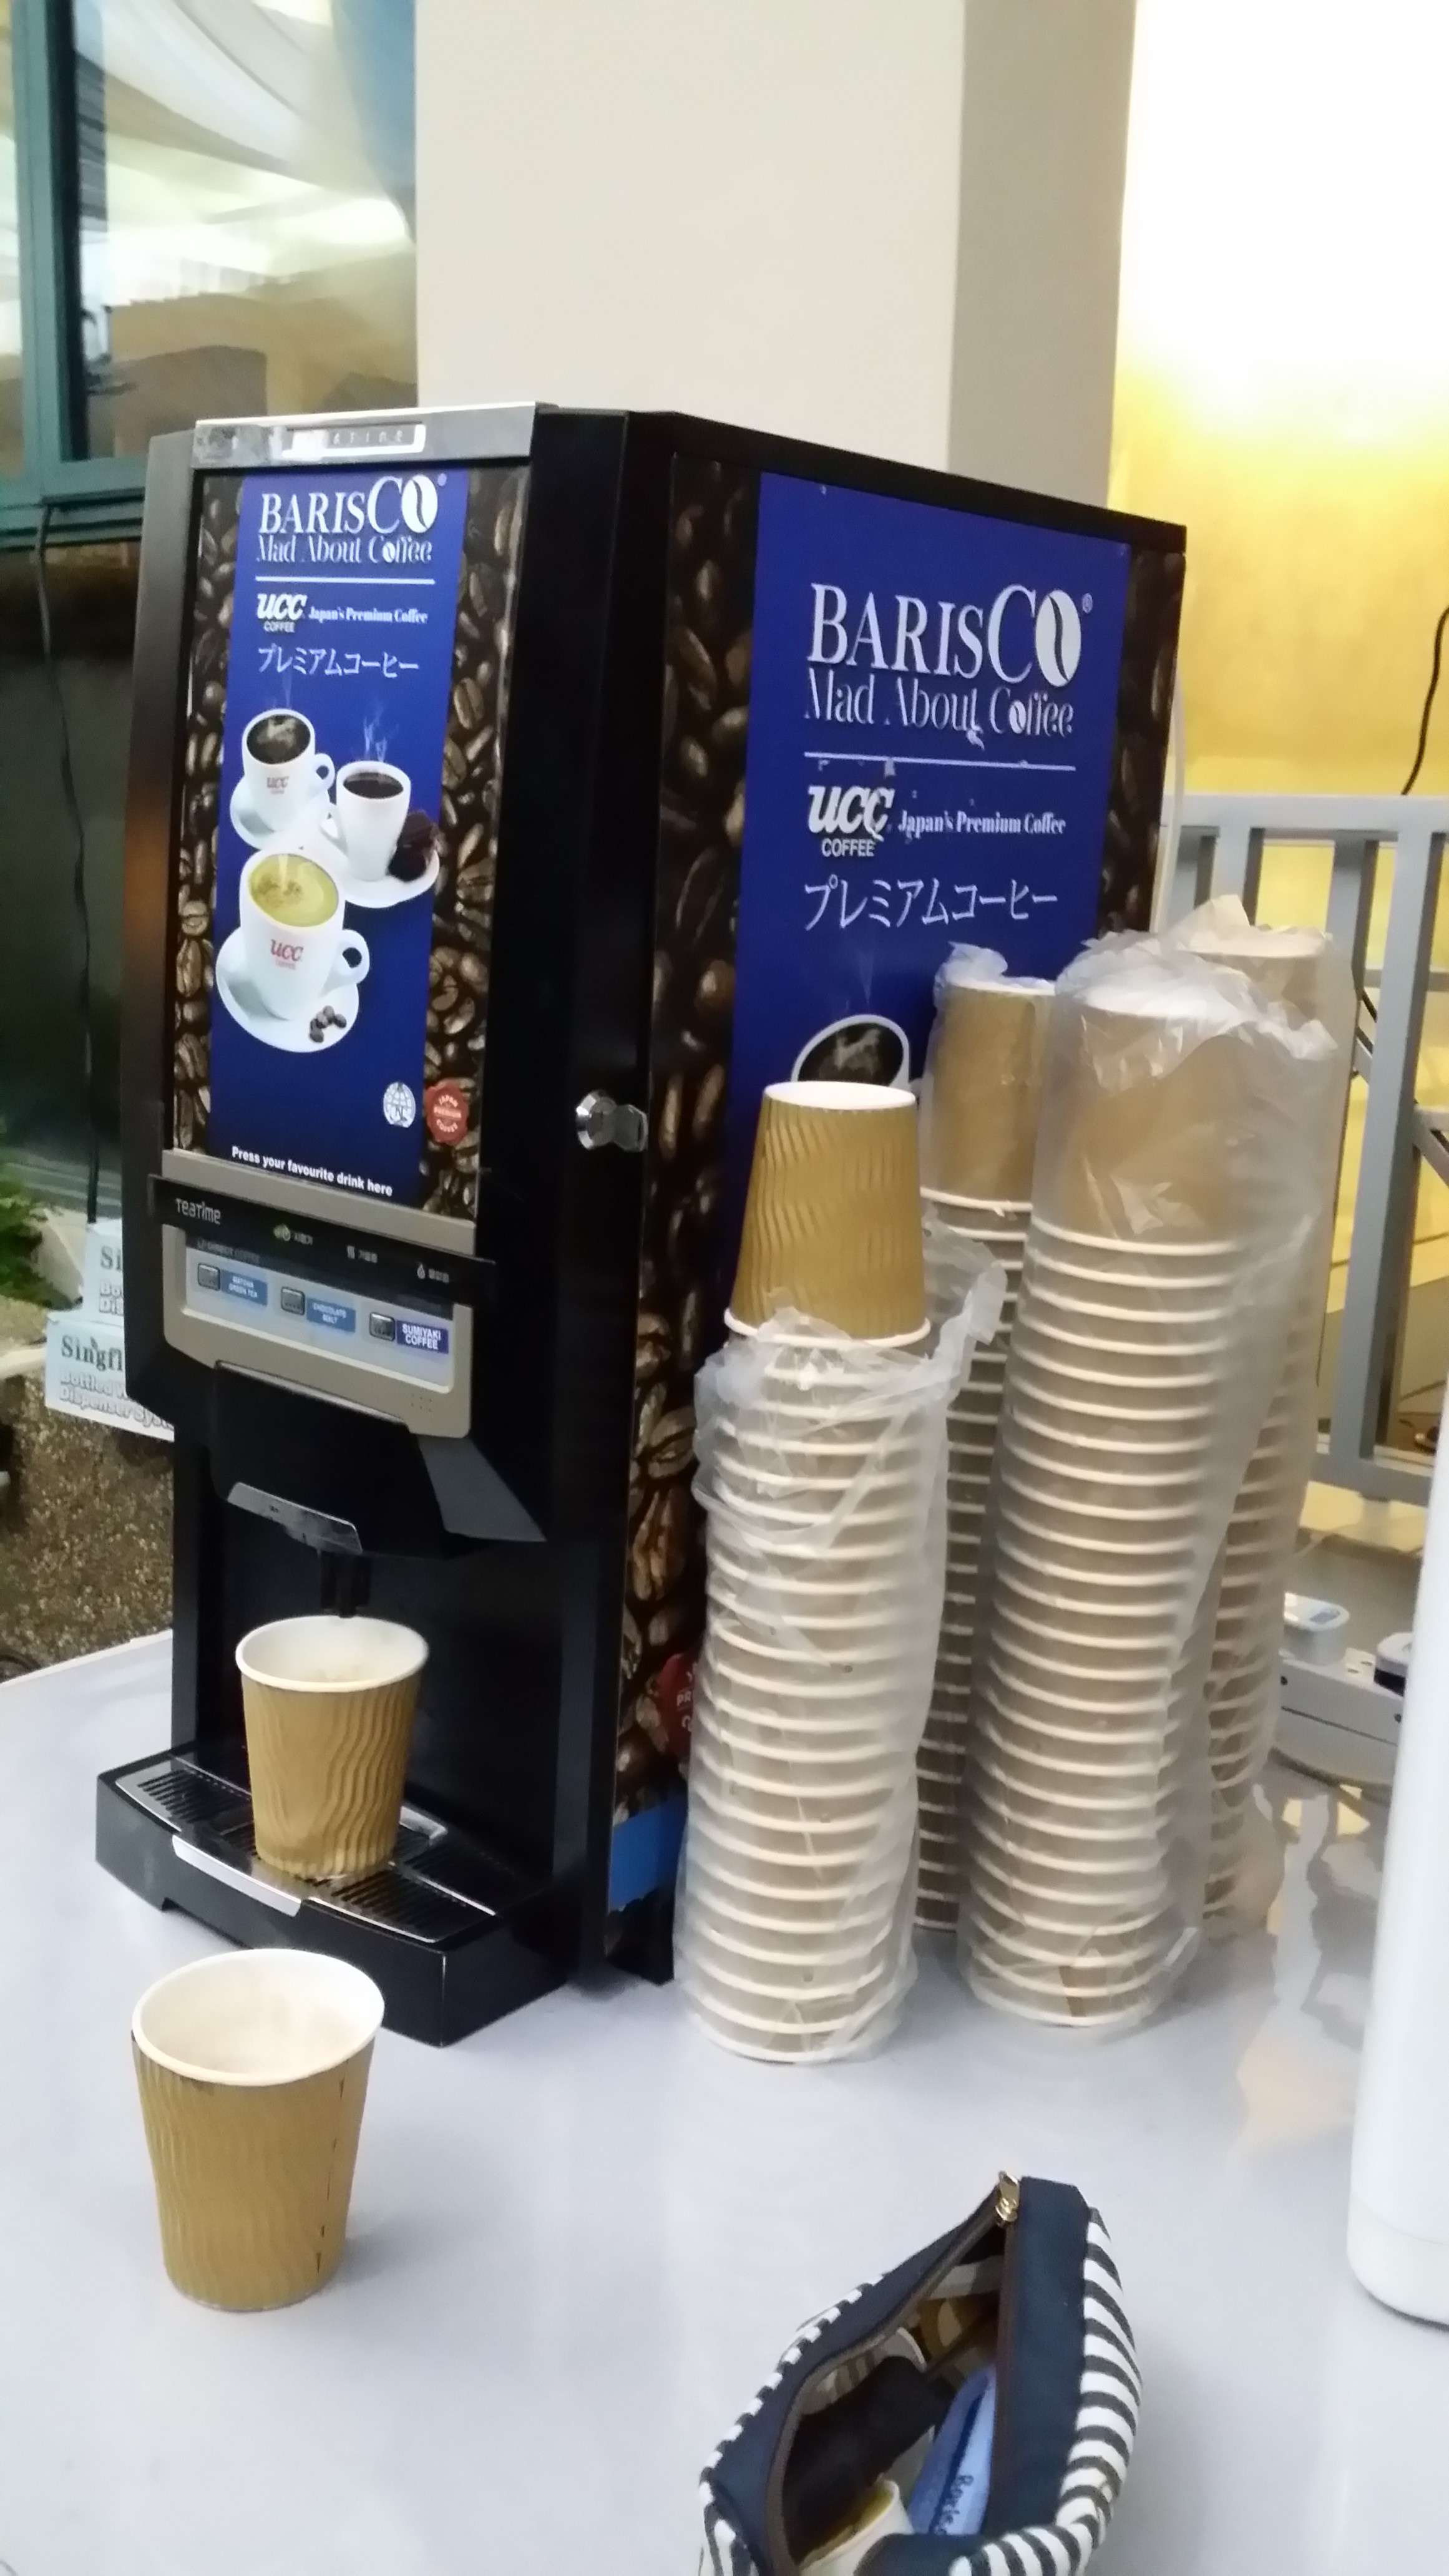 Choc-o-latte Machine, Sipping Chocolate Dispenser - Grand Events Tent &  Event Rental